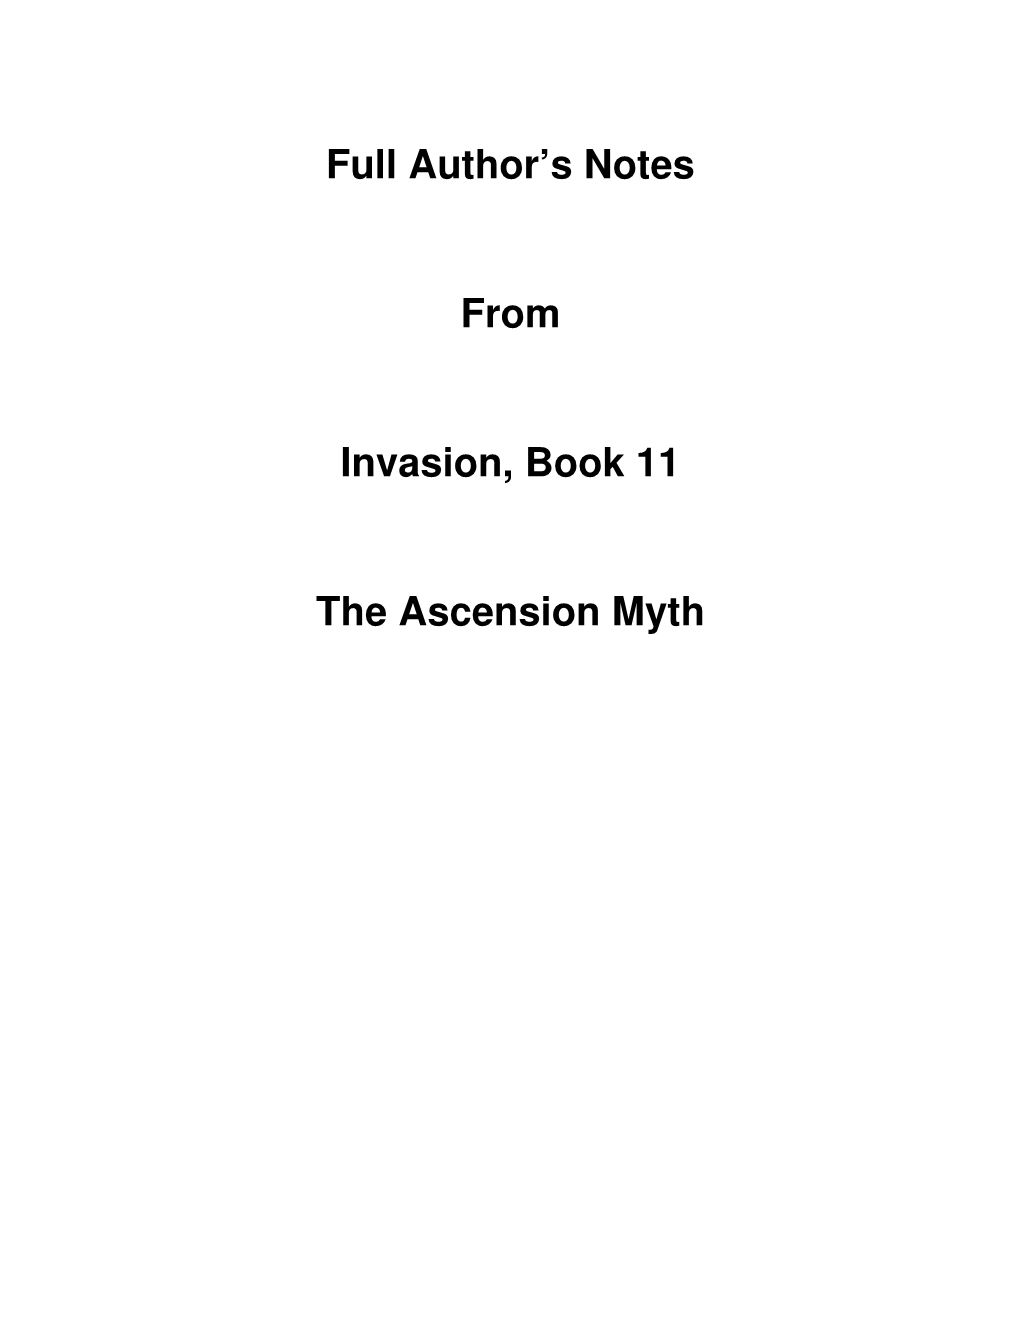 Full Author's Notes from Invasion, Book 11 the Ascension Myth